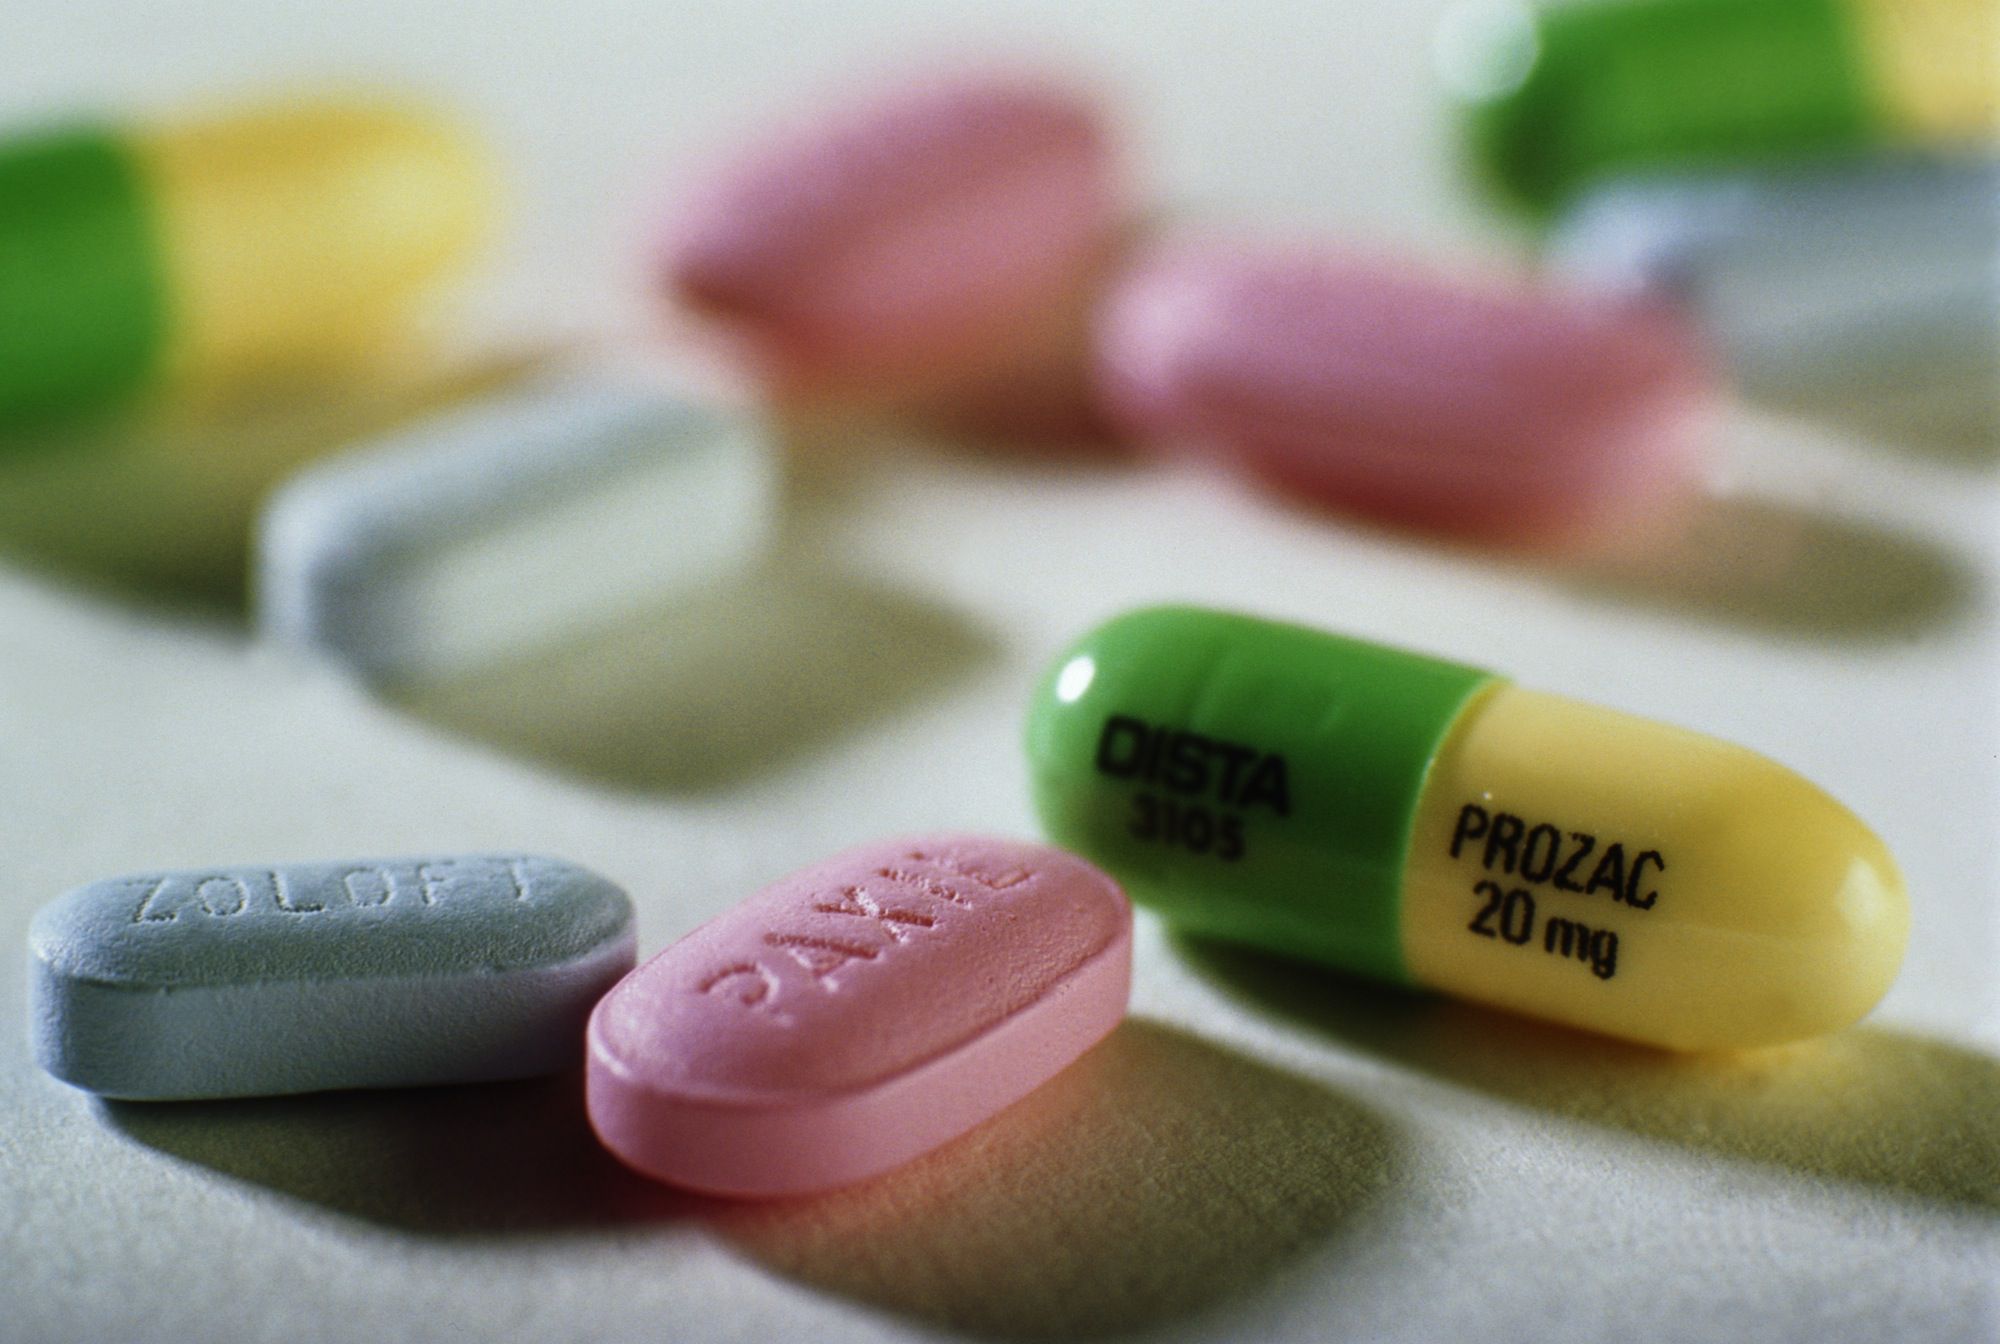 Yellow and green Prozac capsule with pink, blue, and white tablets all around on a white surface